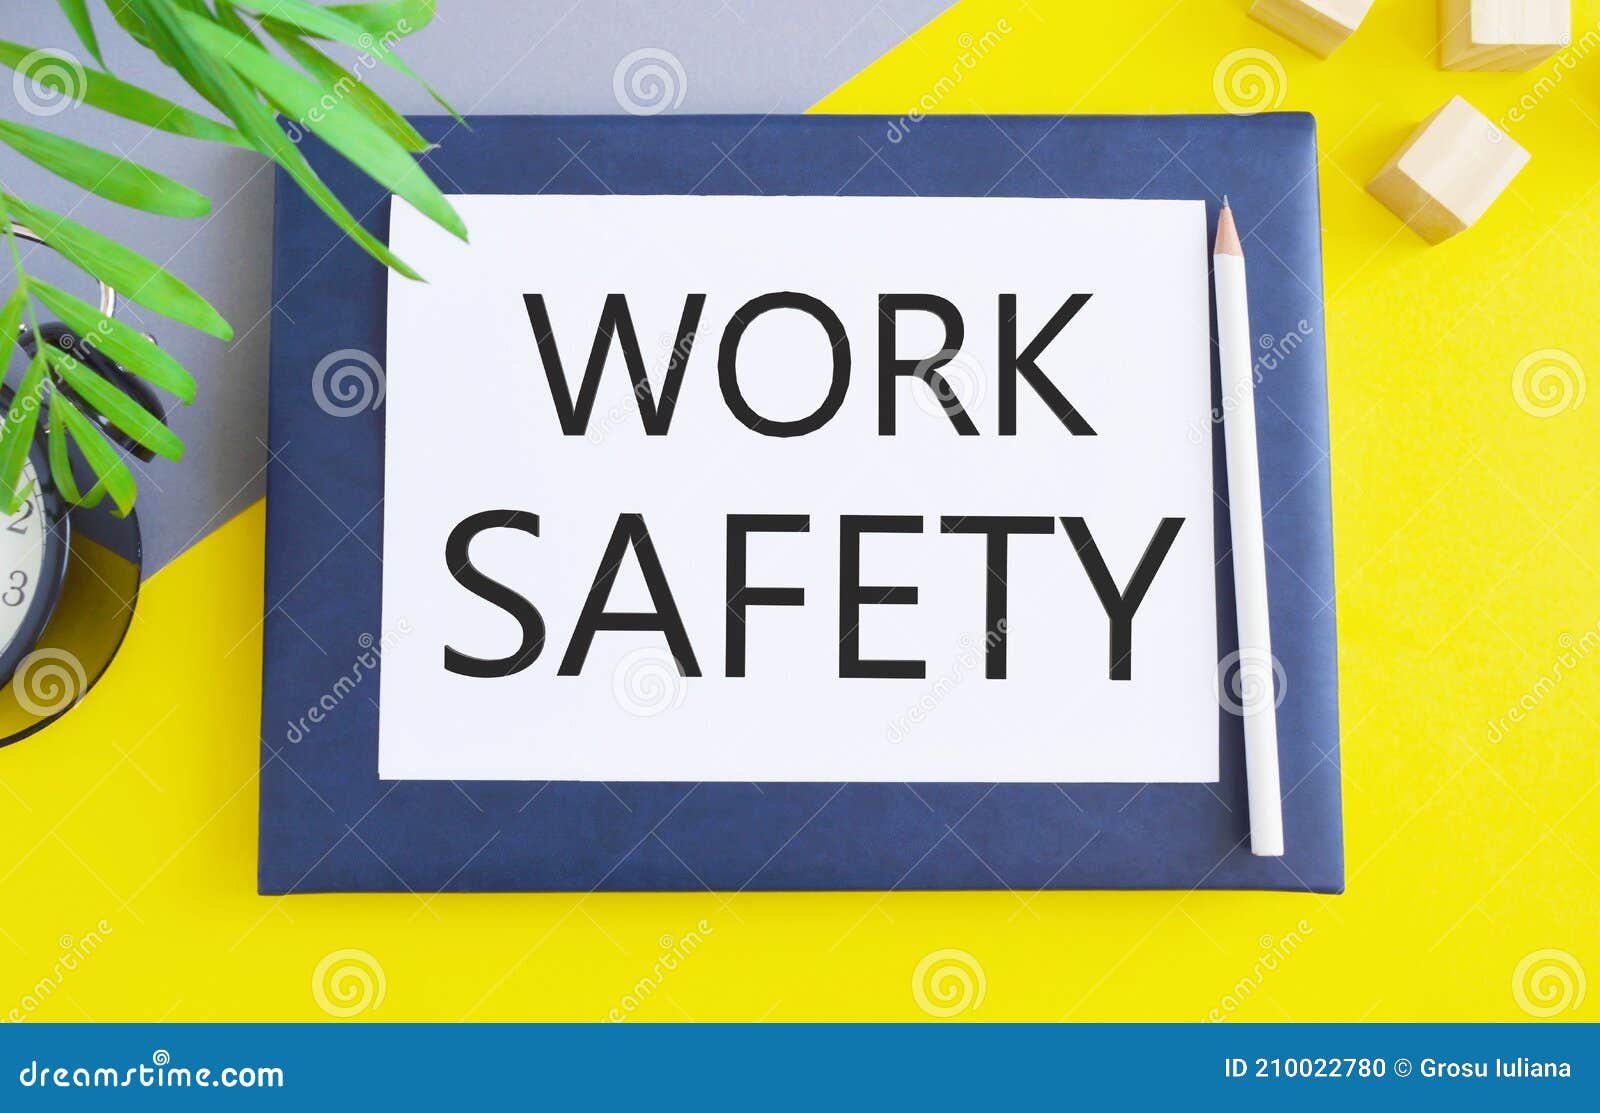 Workplace safety policies